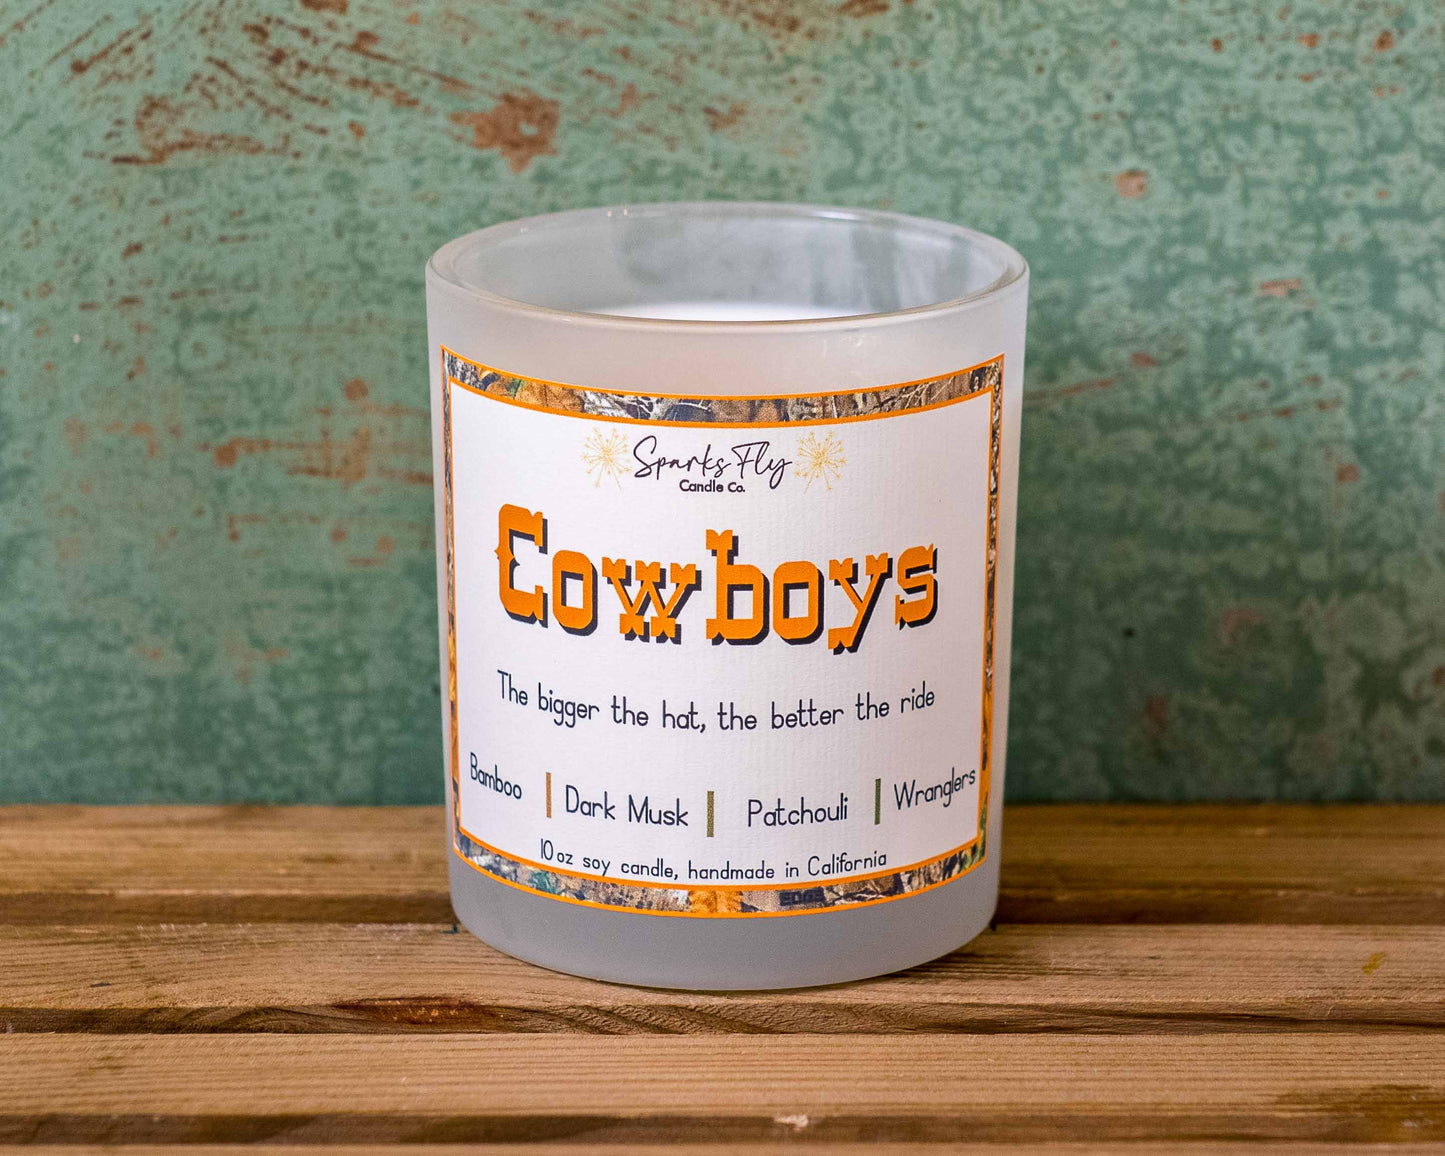 cowboy soy candle with crackling wooden wick, essential oils